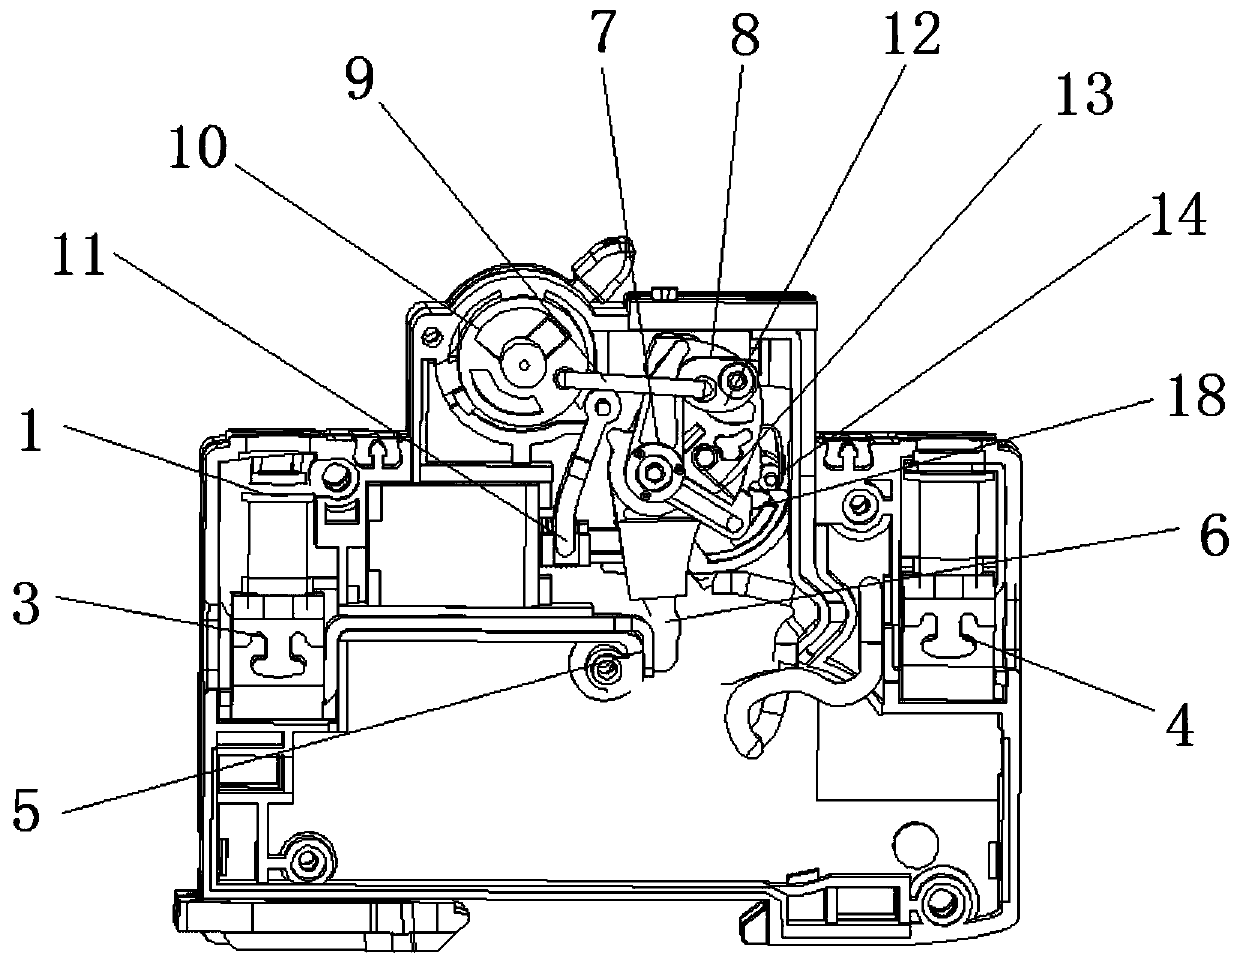 Circuit breaker with N pole without arc extinguishing device